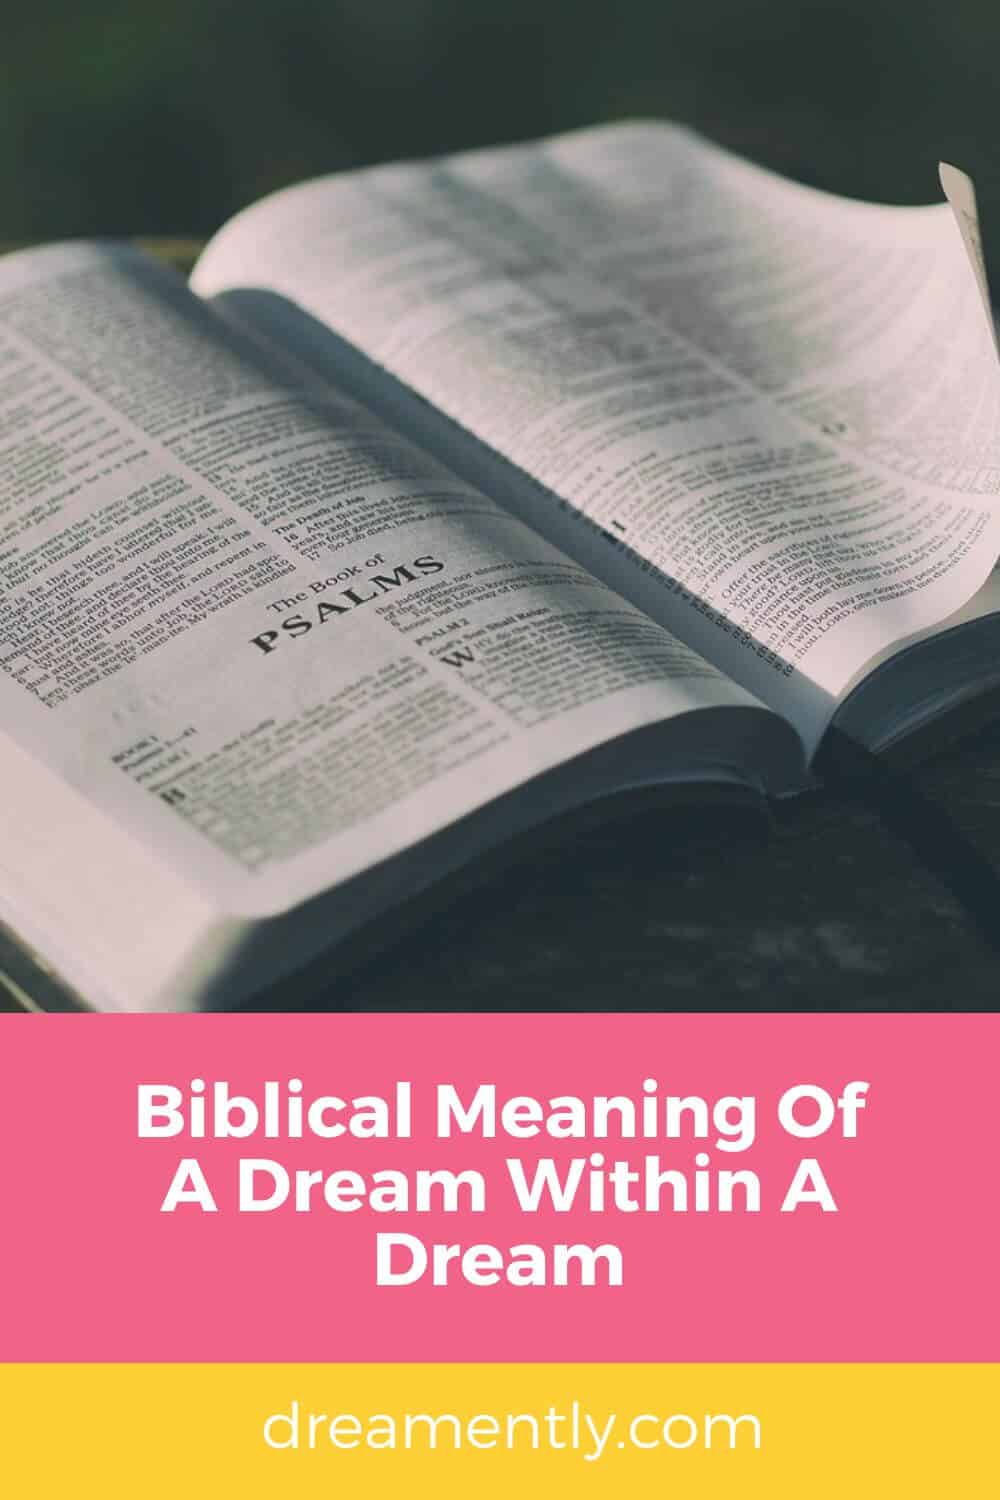 Biblical Meaning Of A Dream Within A Dream